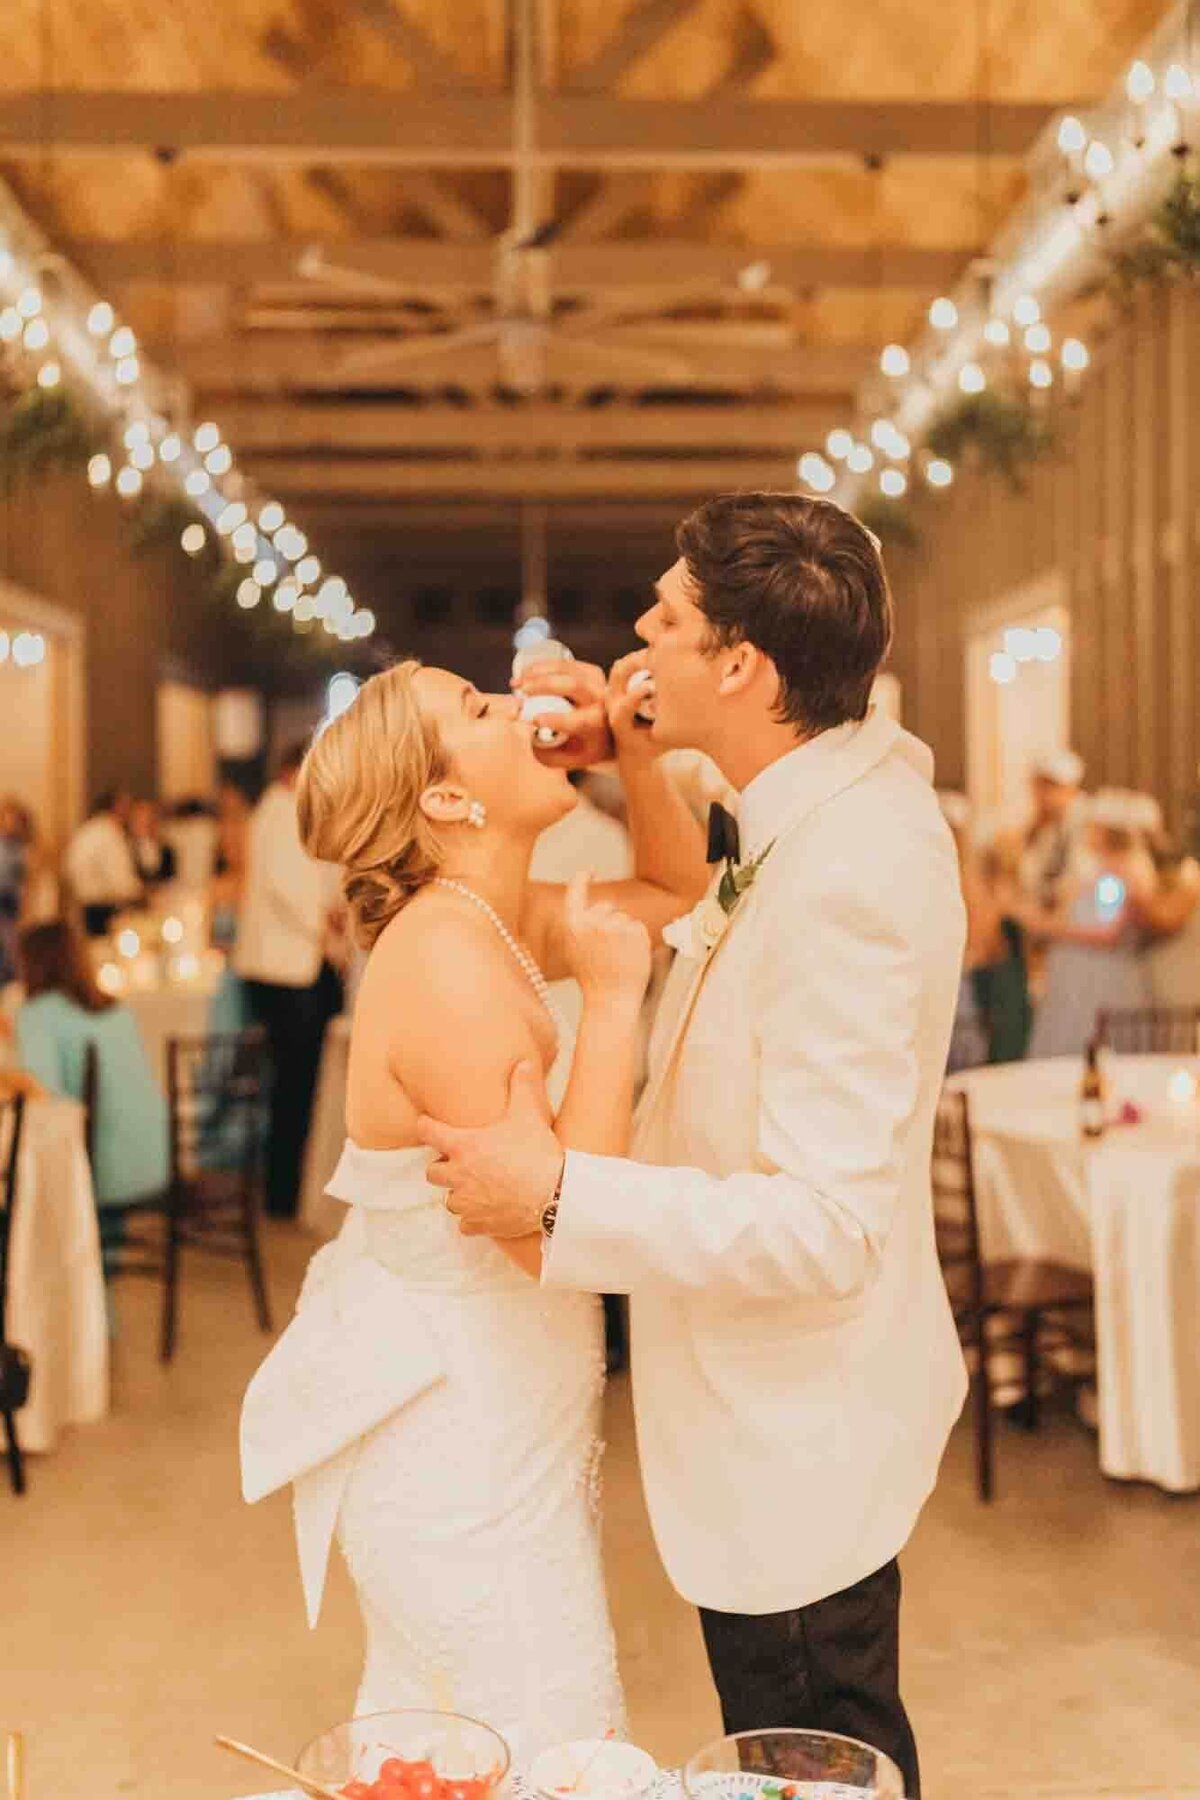 bride and groom feed each other whipped cream from their ice cream bar at their reception.